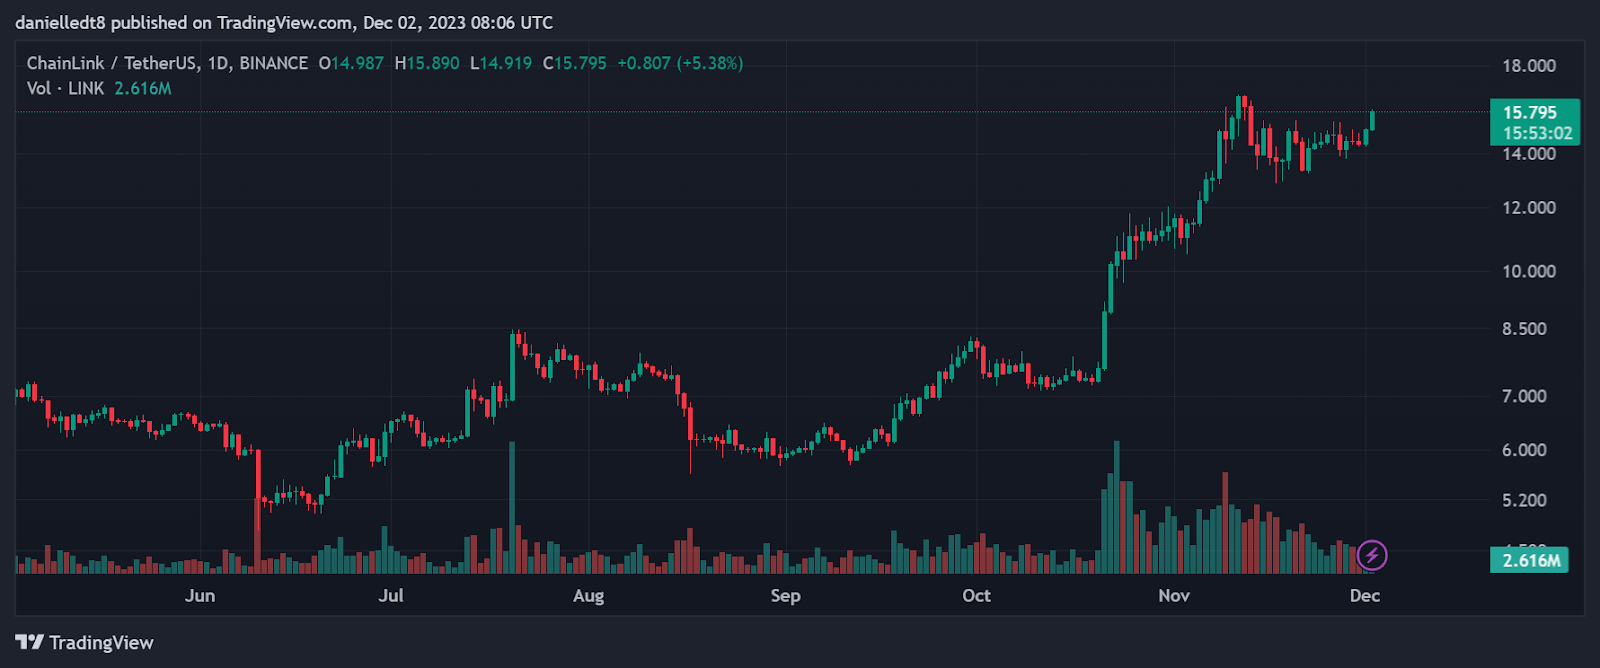 LINK / Tether US 1D (Source: TradingView)